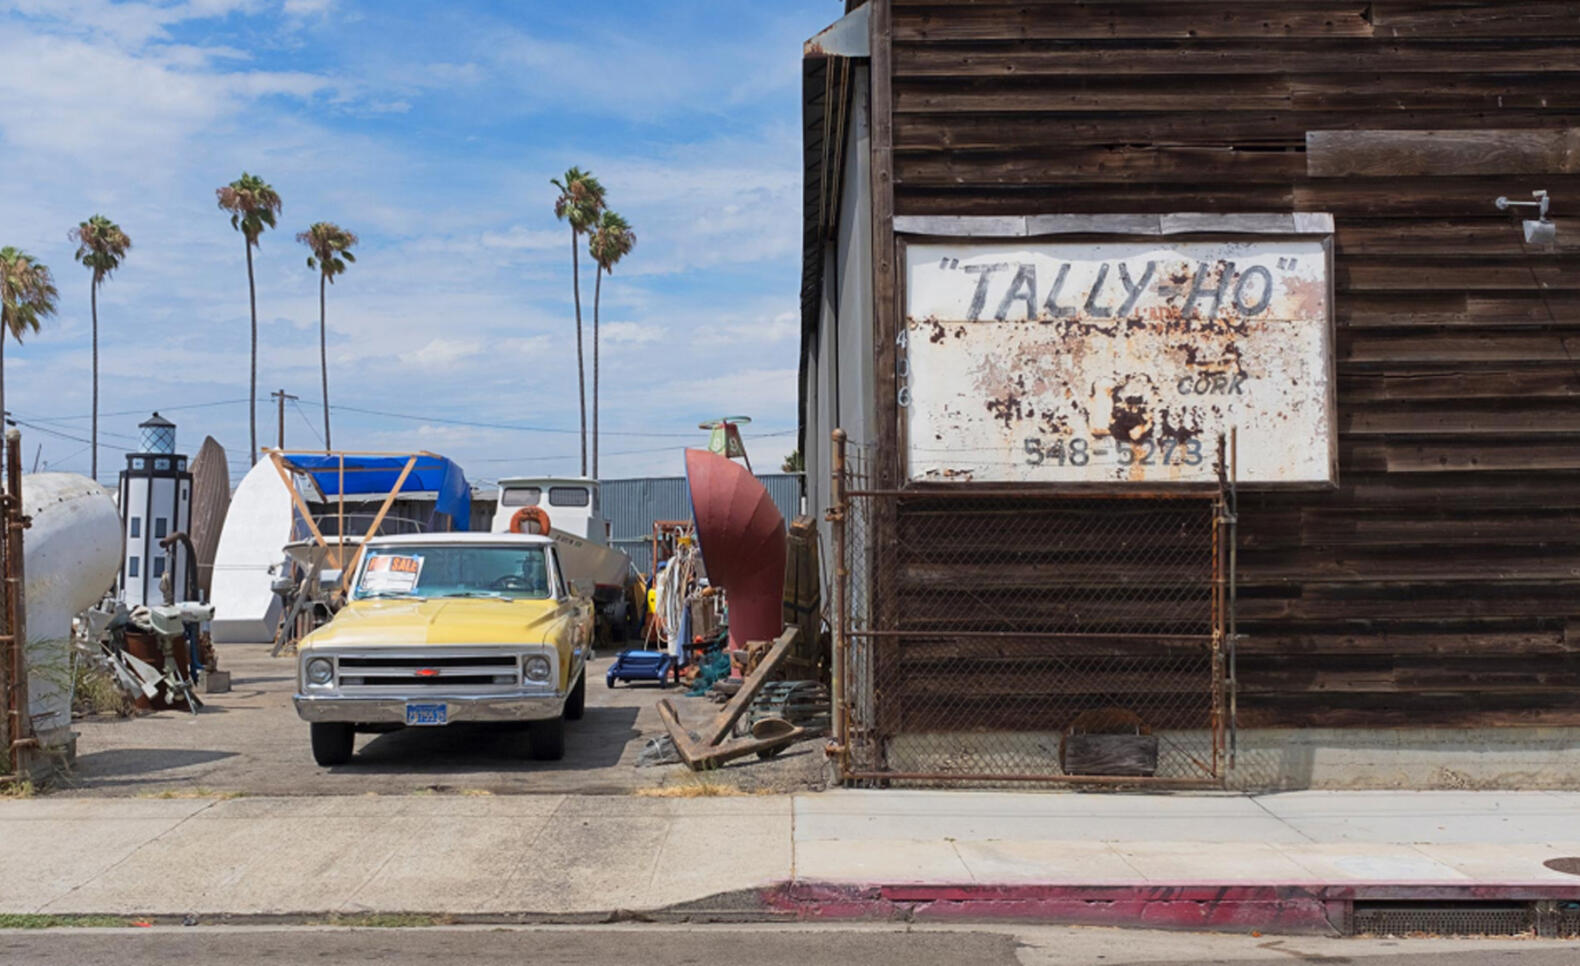 Photograph of San Pedro, near Long Beach, photograph has an old car and several different objects laying around ; Luke Erickson